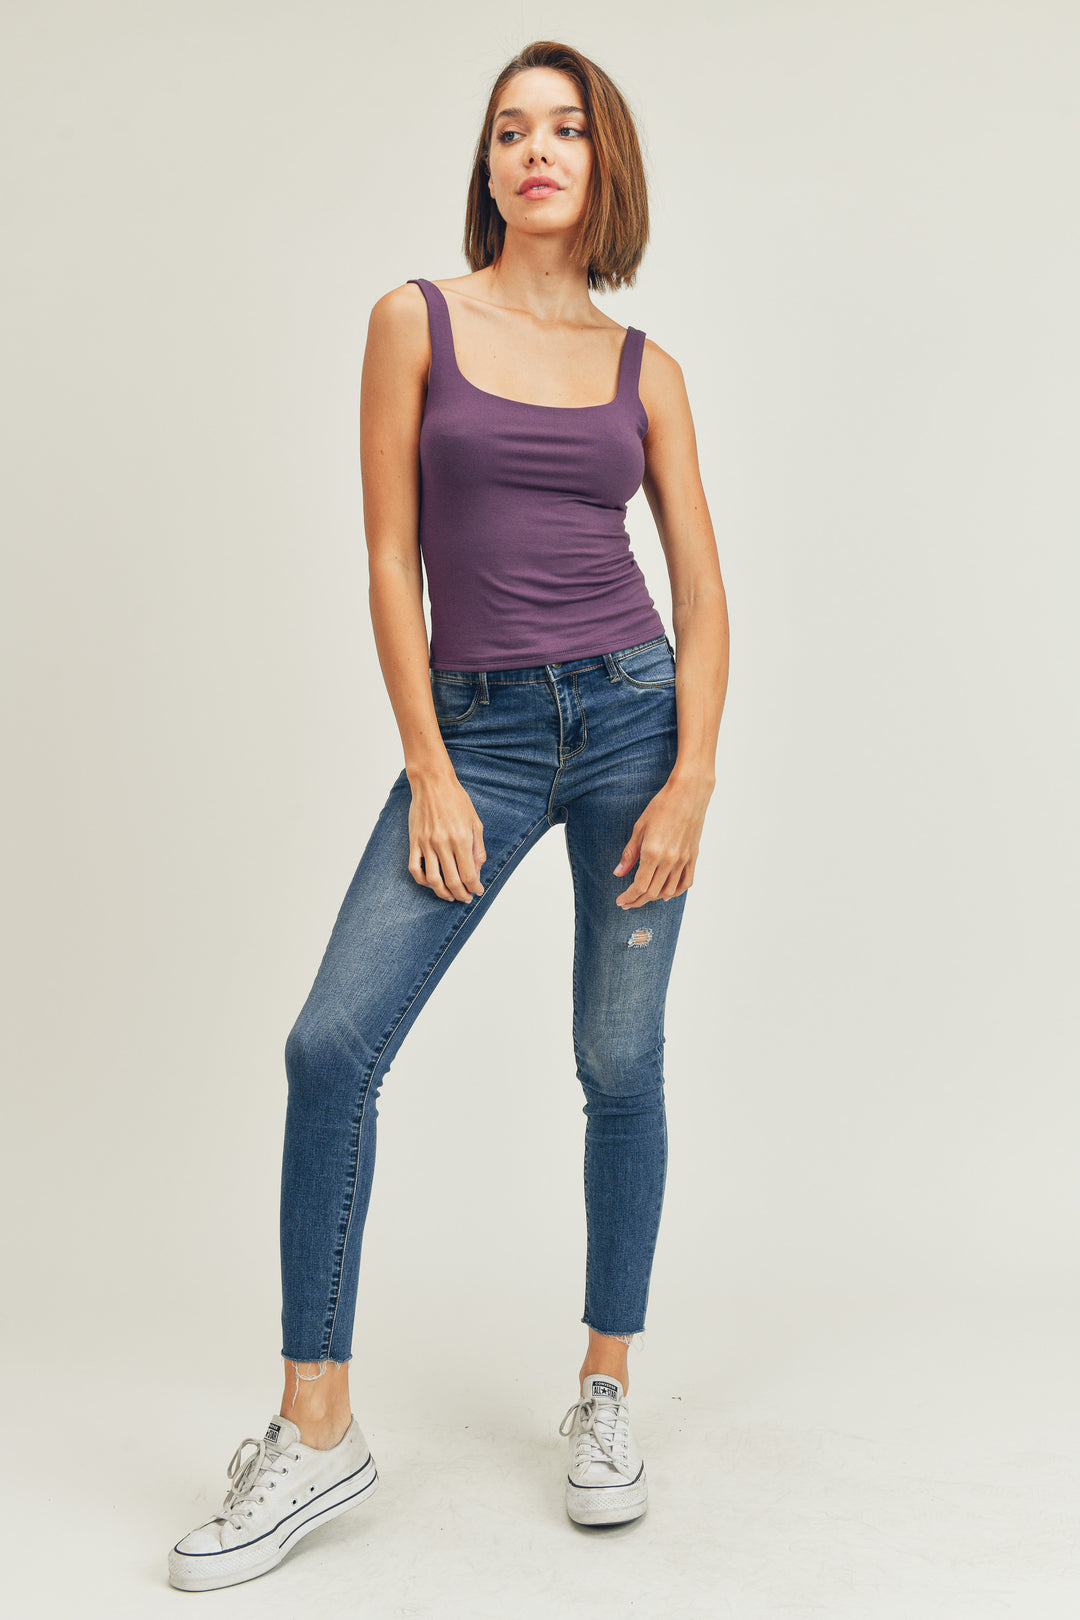 Over The Top Tank - Plum